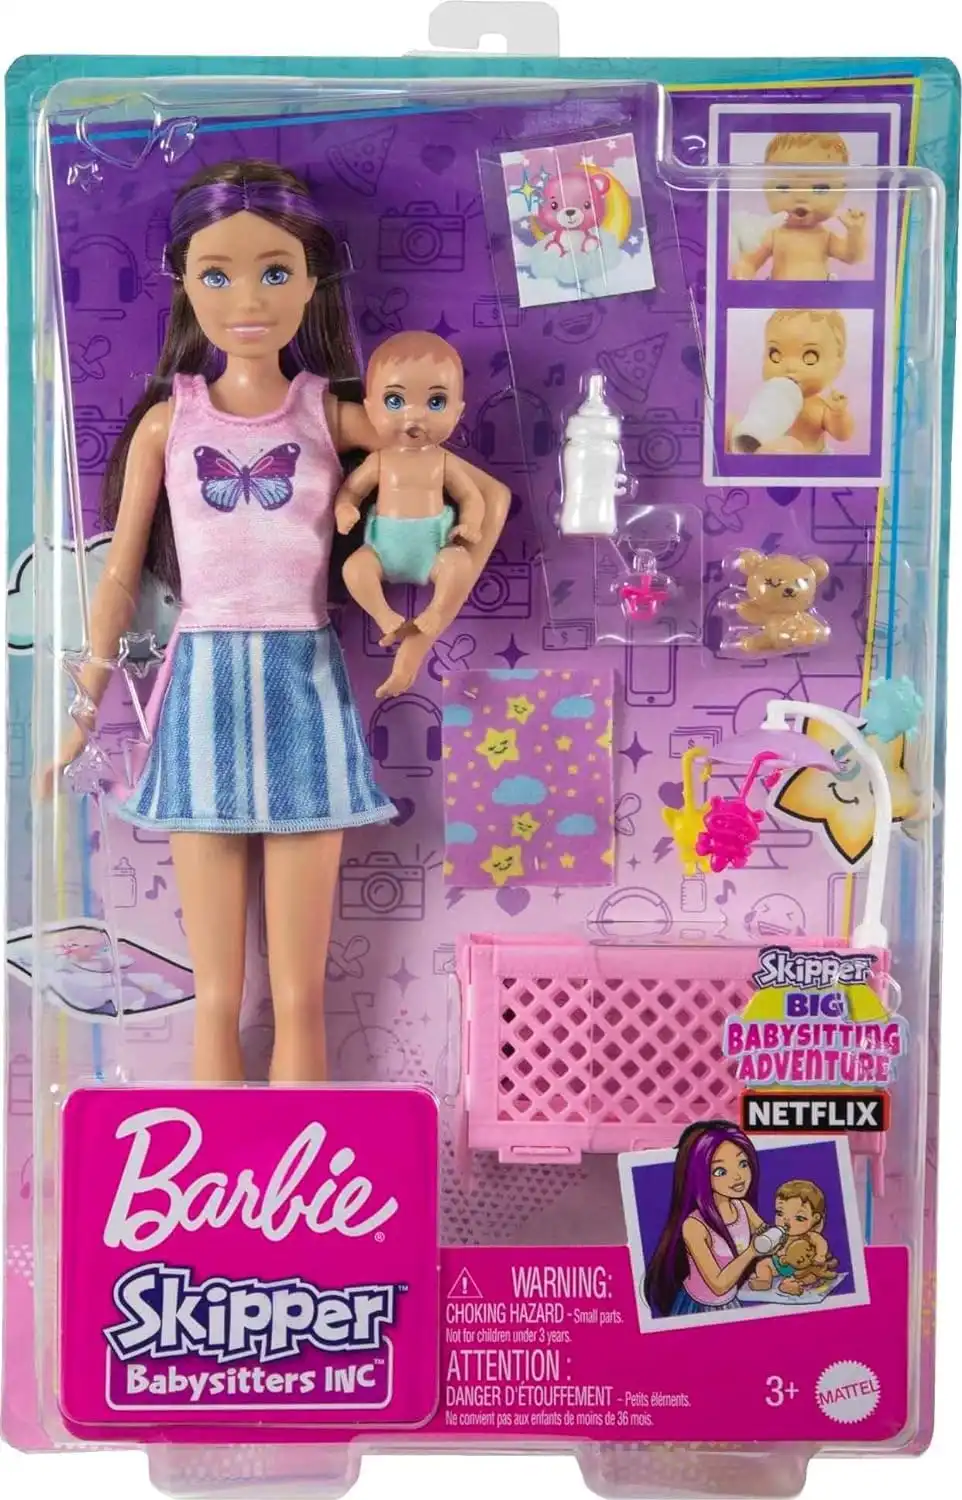 Barbie Doll and Crib Playset with Skipper Doll